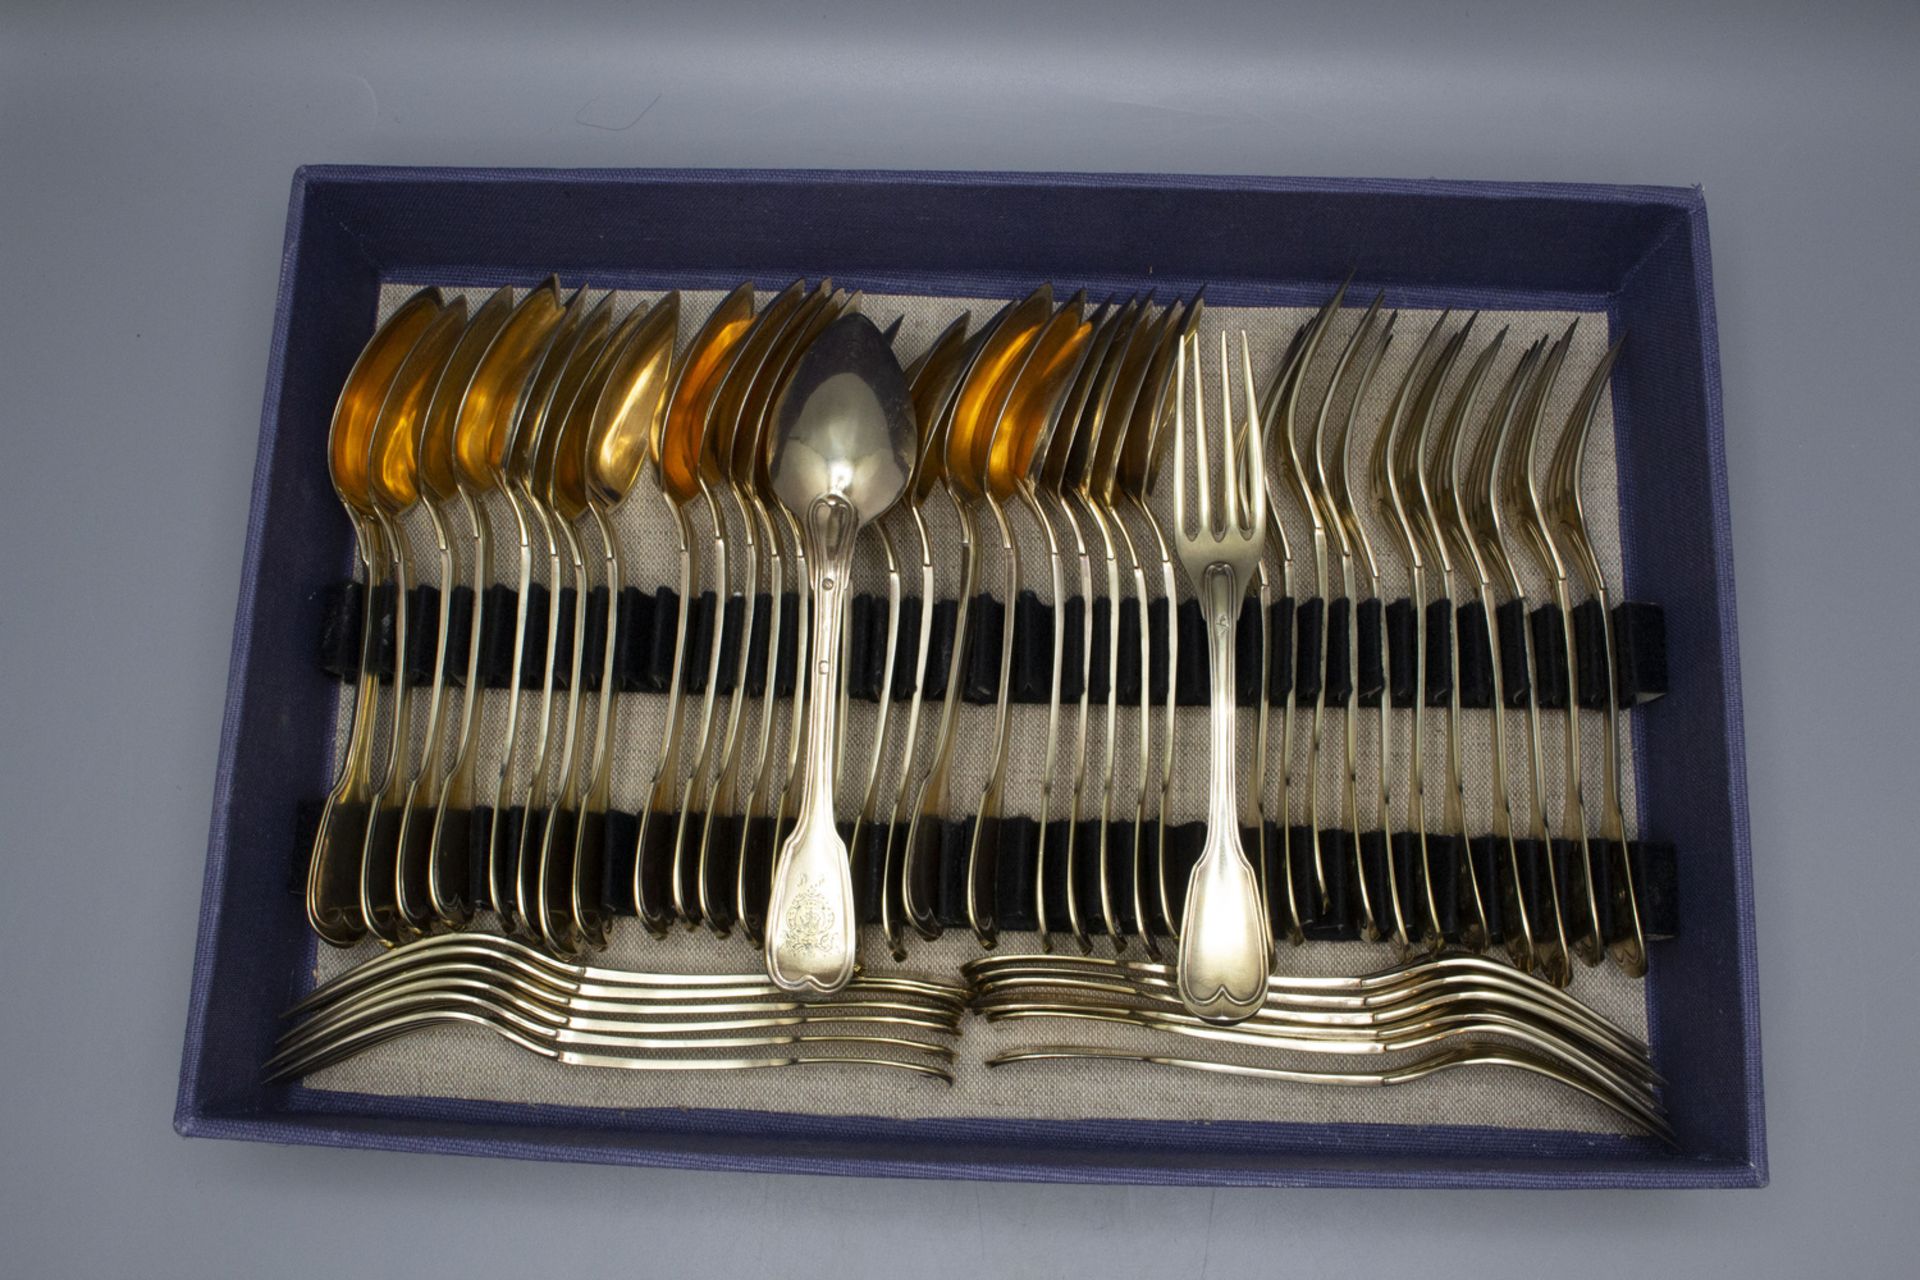 48-tlg. Silberbesteck / A set of 48 pieces silver cutlery, Charles Salomon Mahler, Paris, 1824-1833 - Image 2 of 5